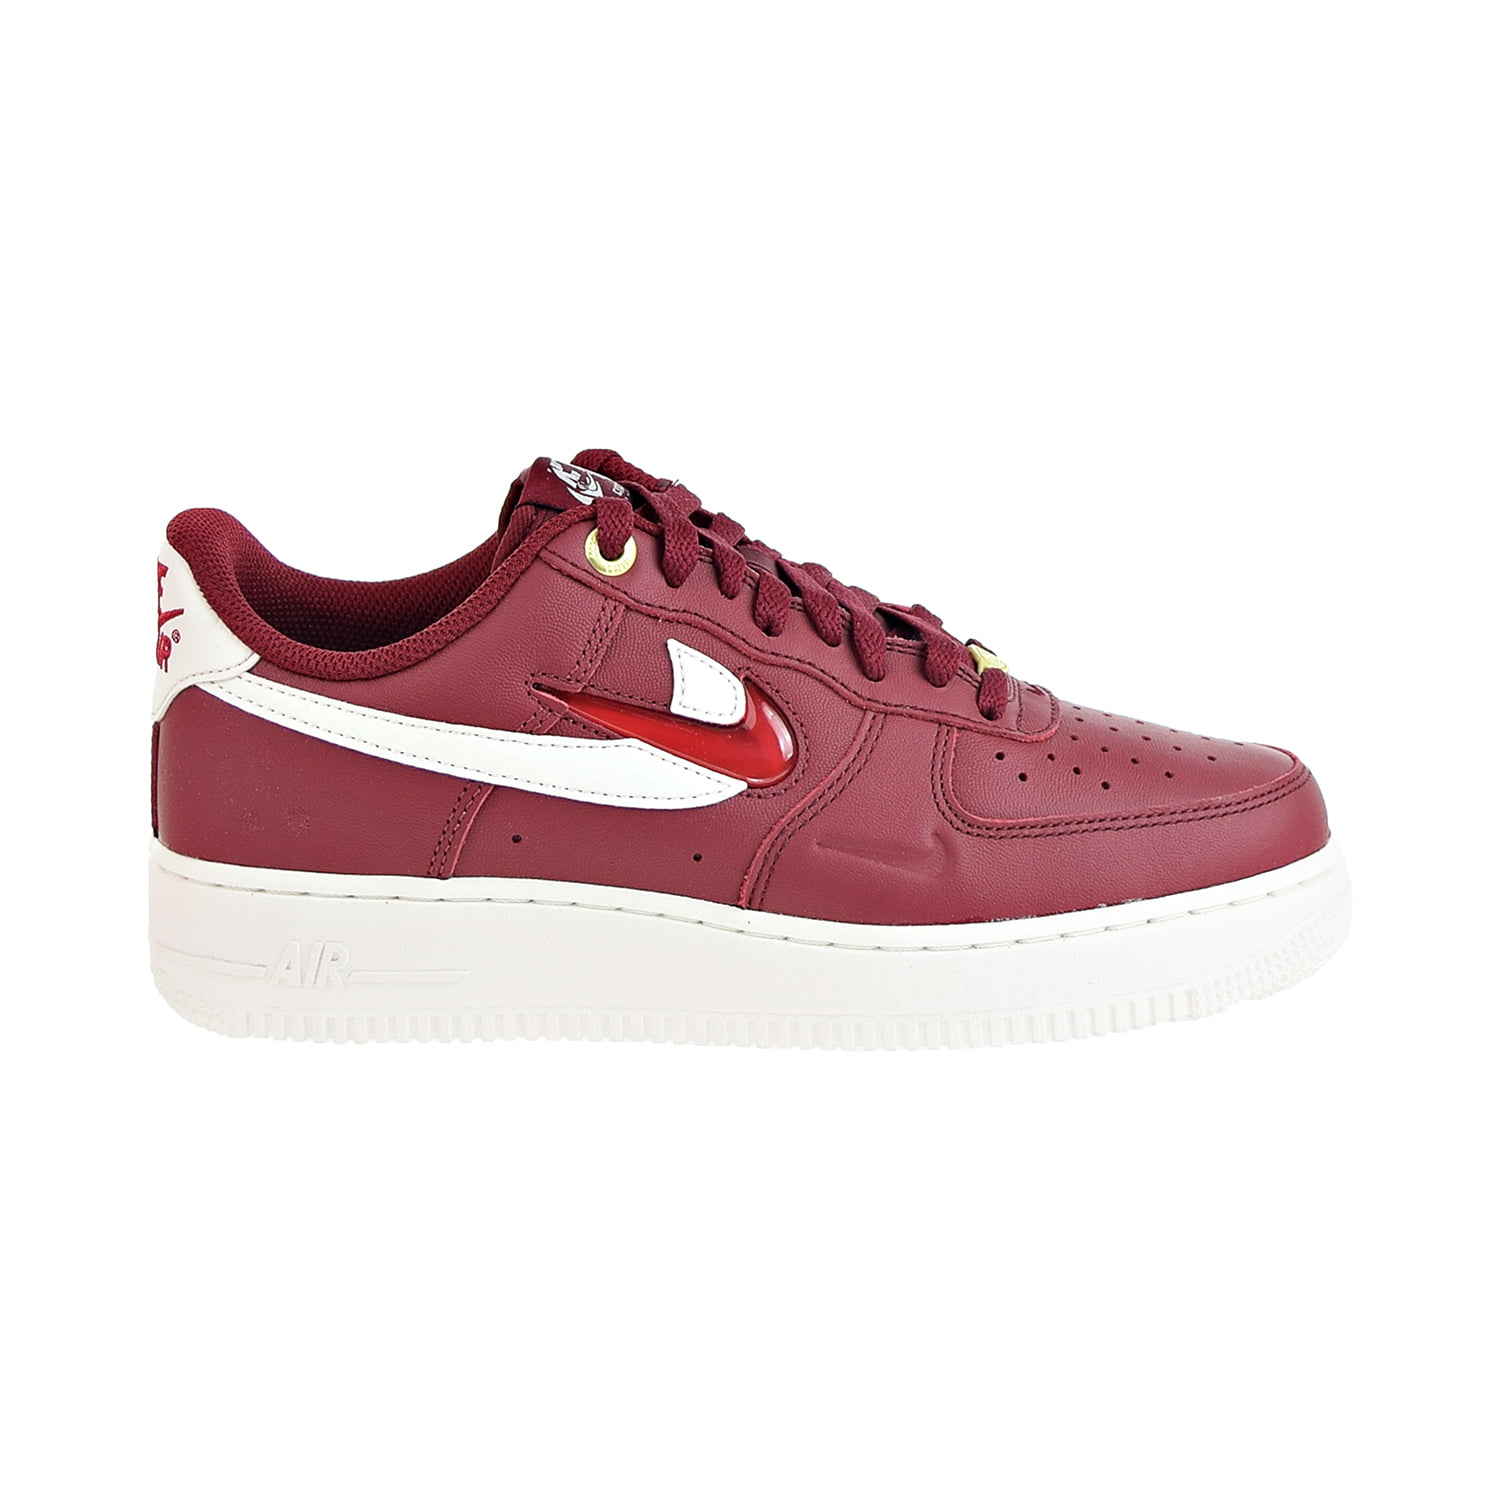 Nike Air Force 1 '07 PRM Team Red/Sail-Gym Red-Team Red DQ7664-600